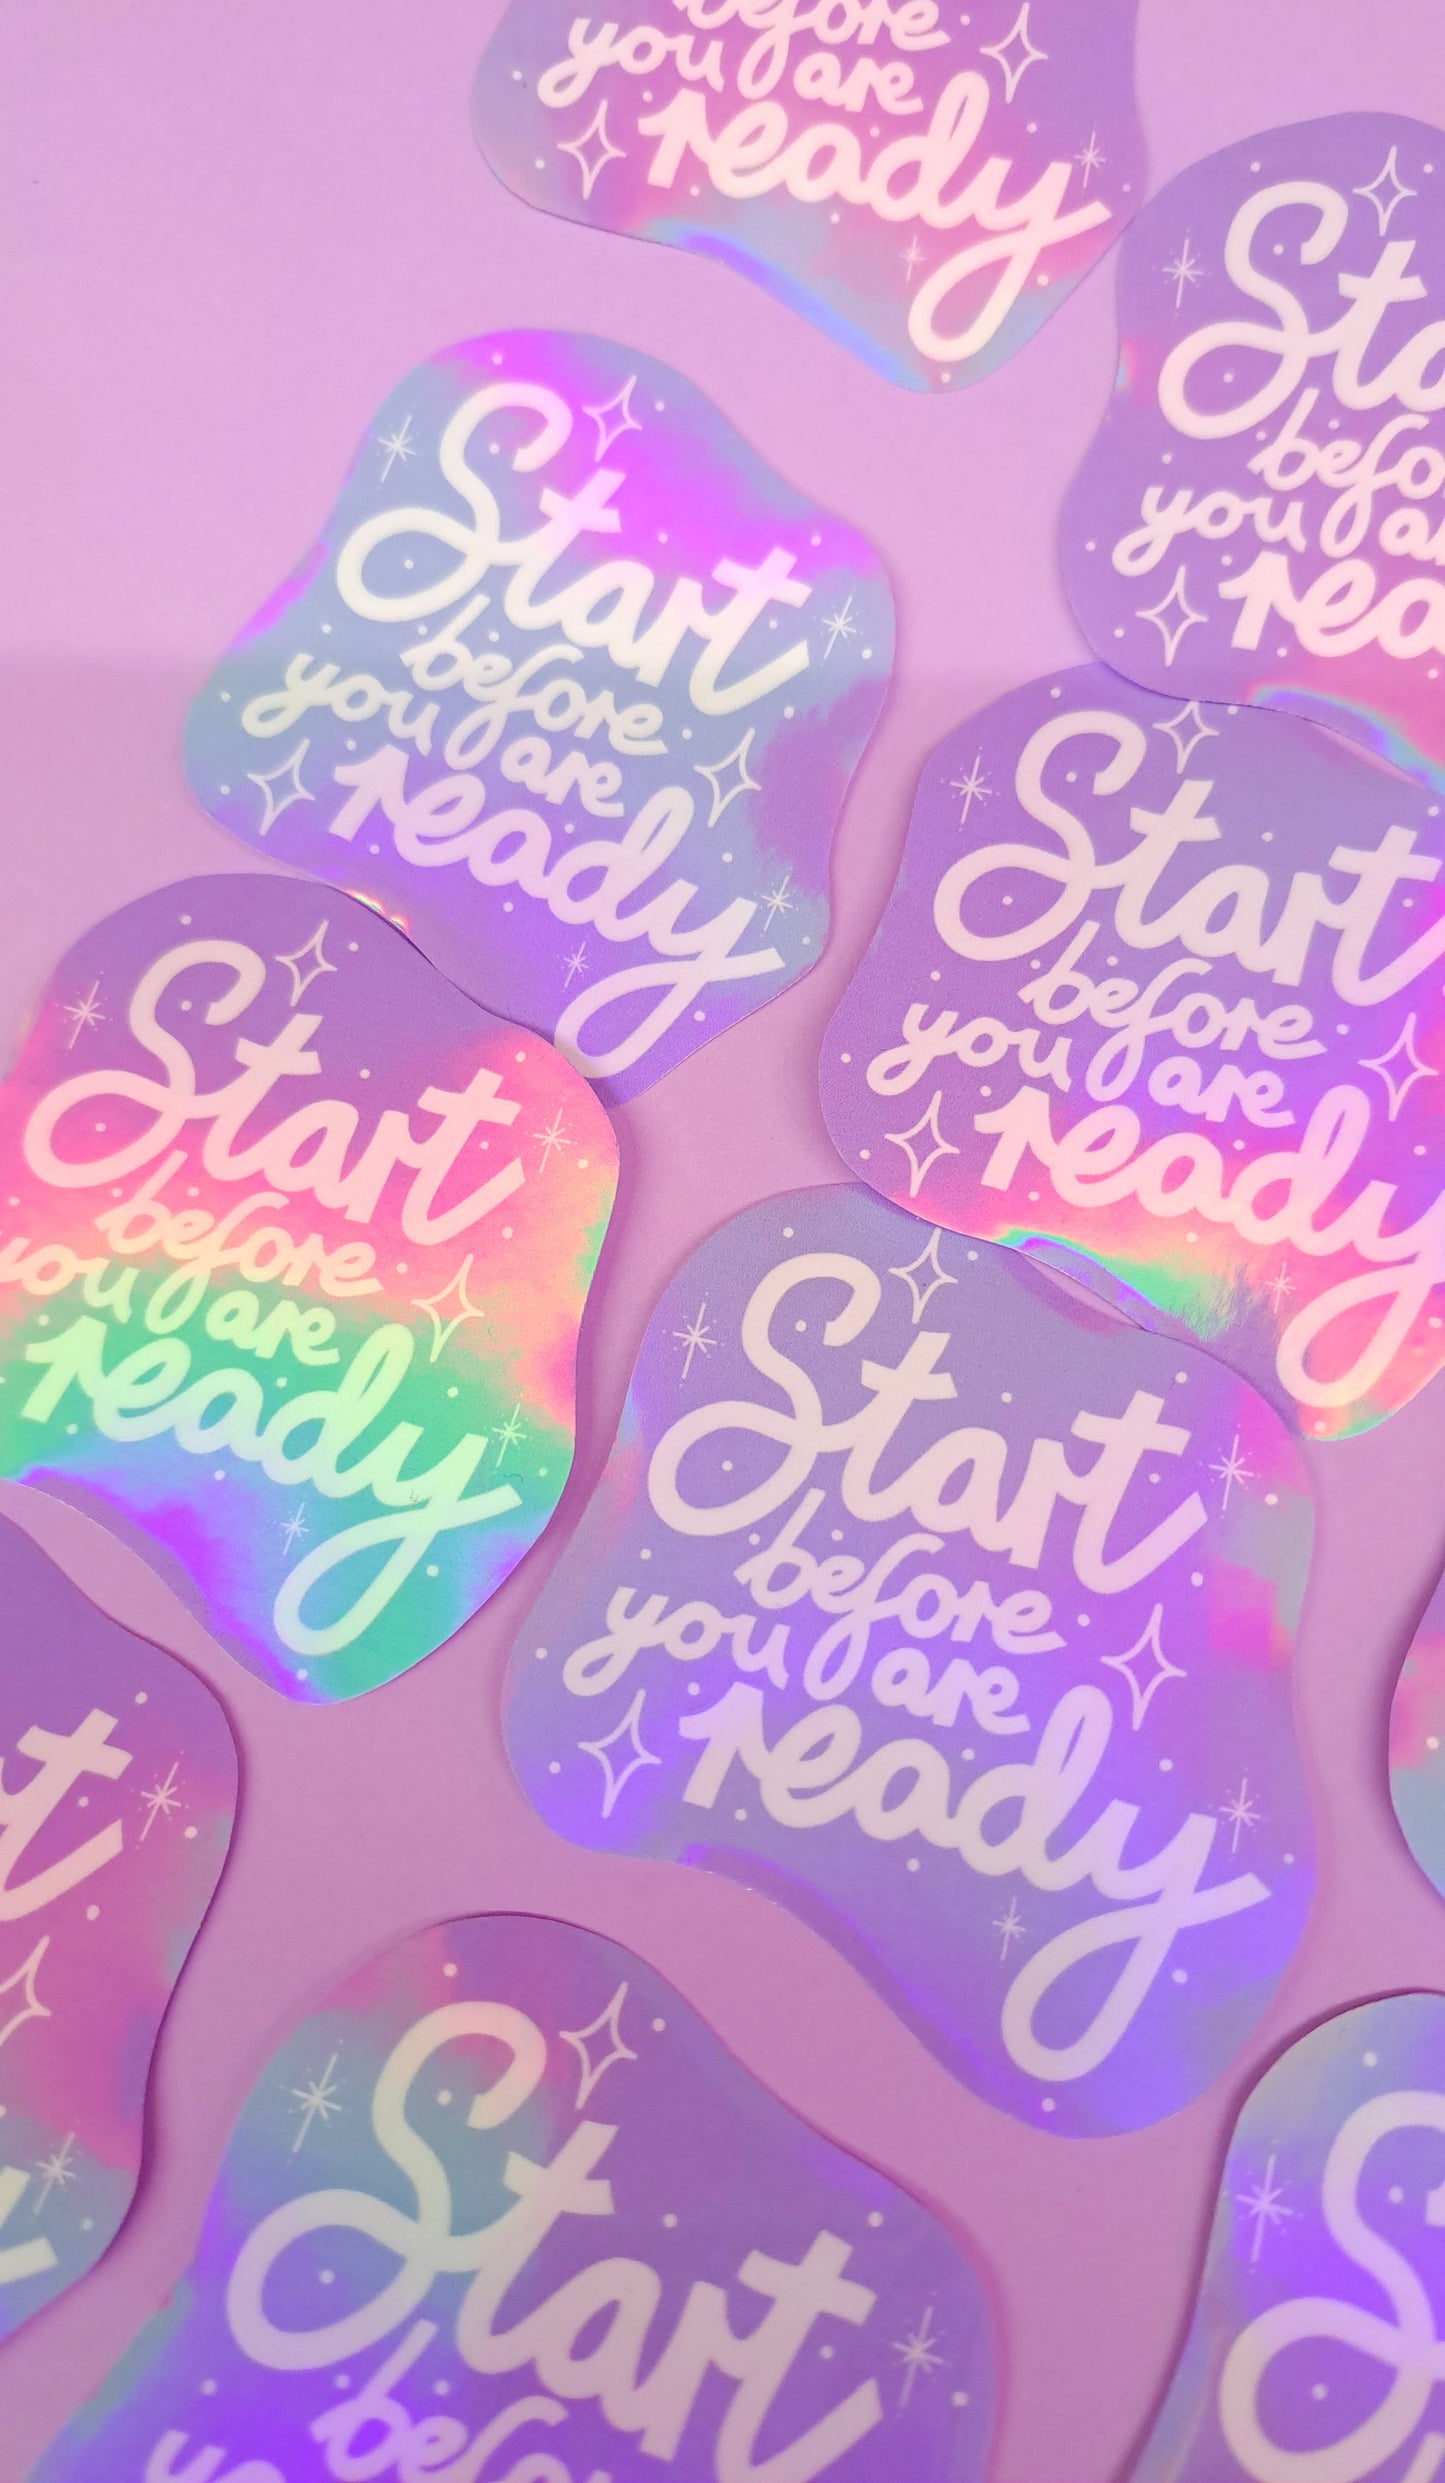 Holographic Start Before Ready Sticker